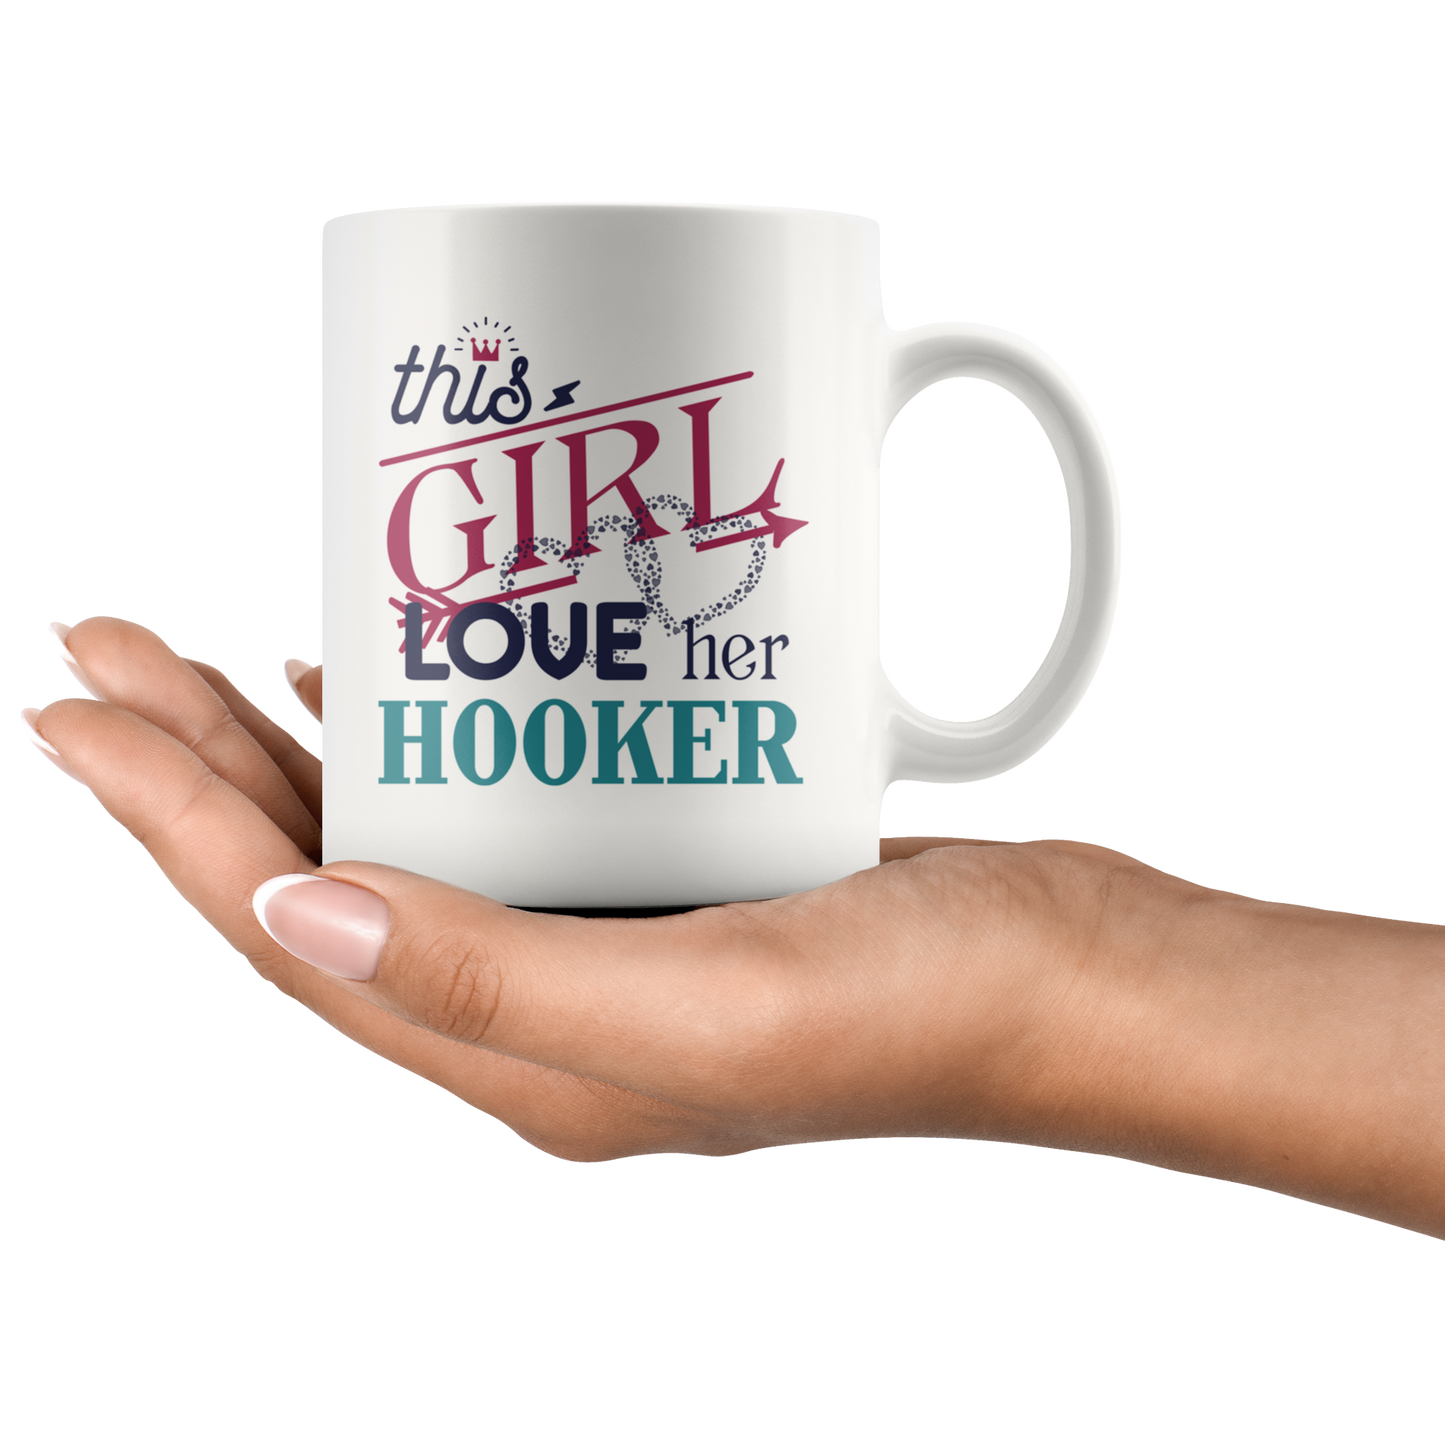 ND-9620533405-sp-23645 - [ Hooker | 1 | 1 ]Funny Christmas Mug Gifts For Her, Wife - This Girl Love Her